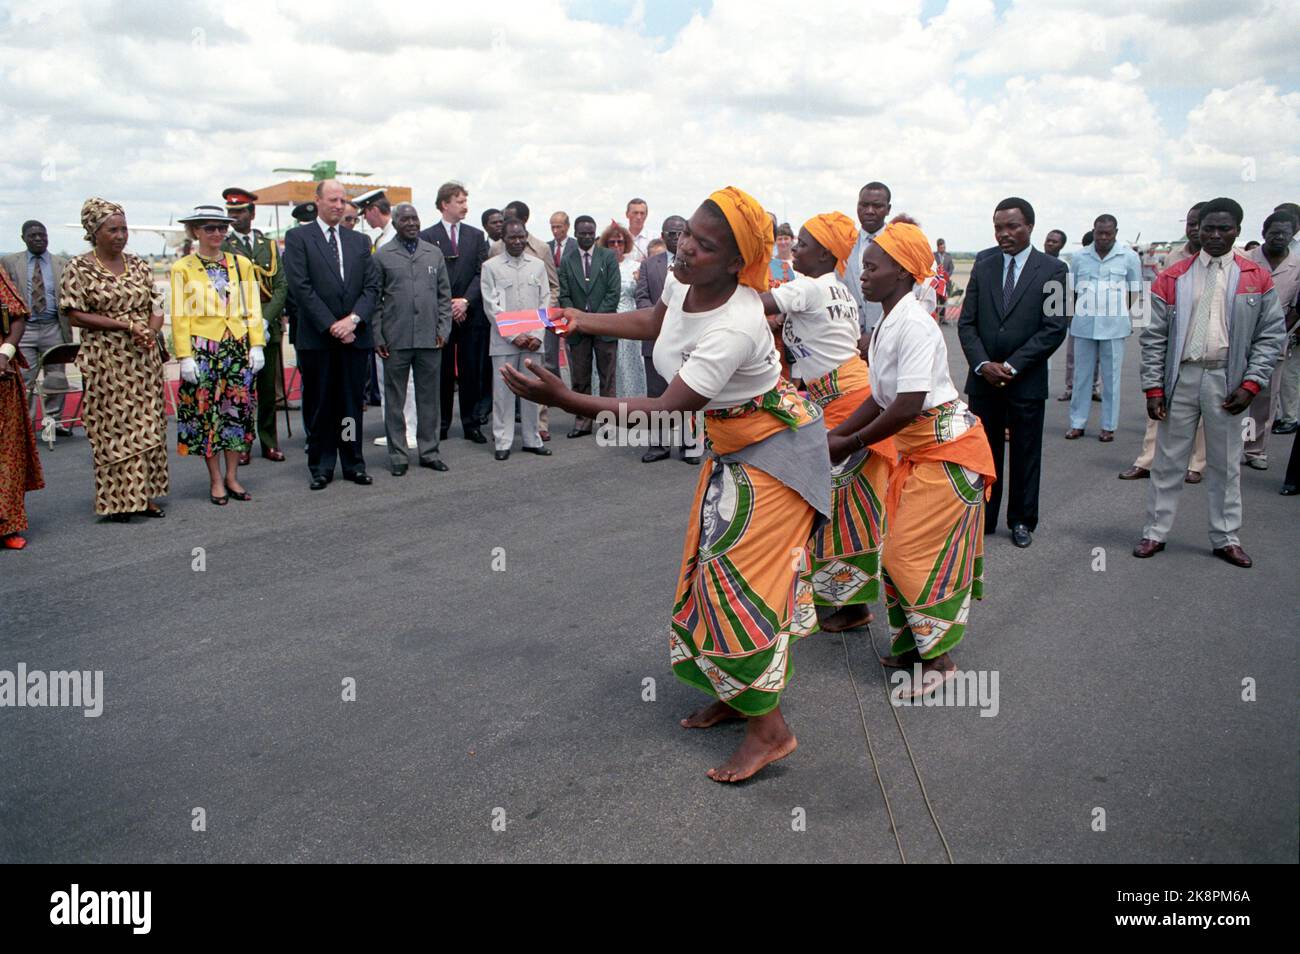 Zambia - March 1990 The Crown Prince couple in Zambia. Crown Prince Harald and Crown Princess Sonja were welcomed by colorful dancers at the airport when they arrived at Zambia's capital Lusaka on their official visit. Photo: Bjørn-Owe Holmberg / NTB Stock Photo